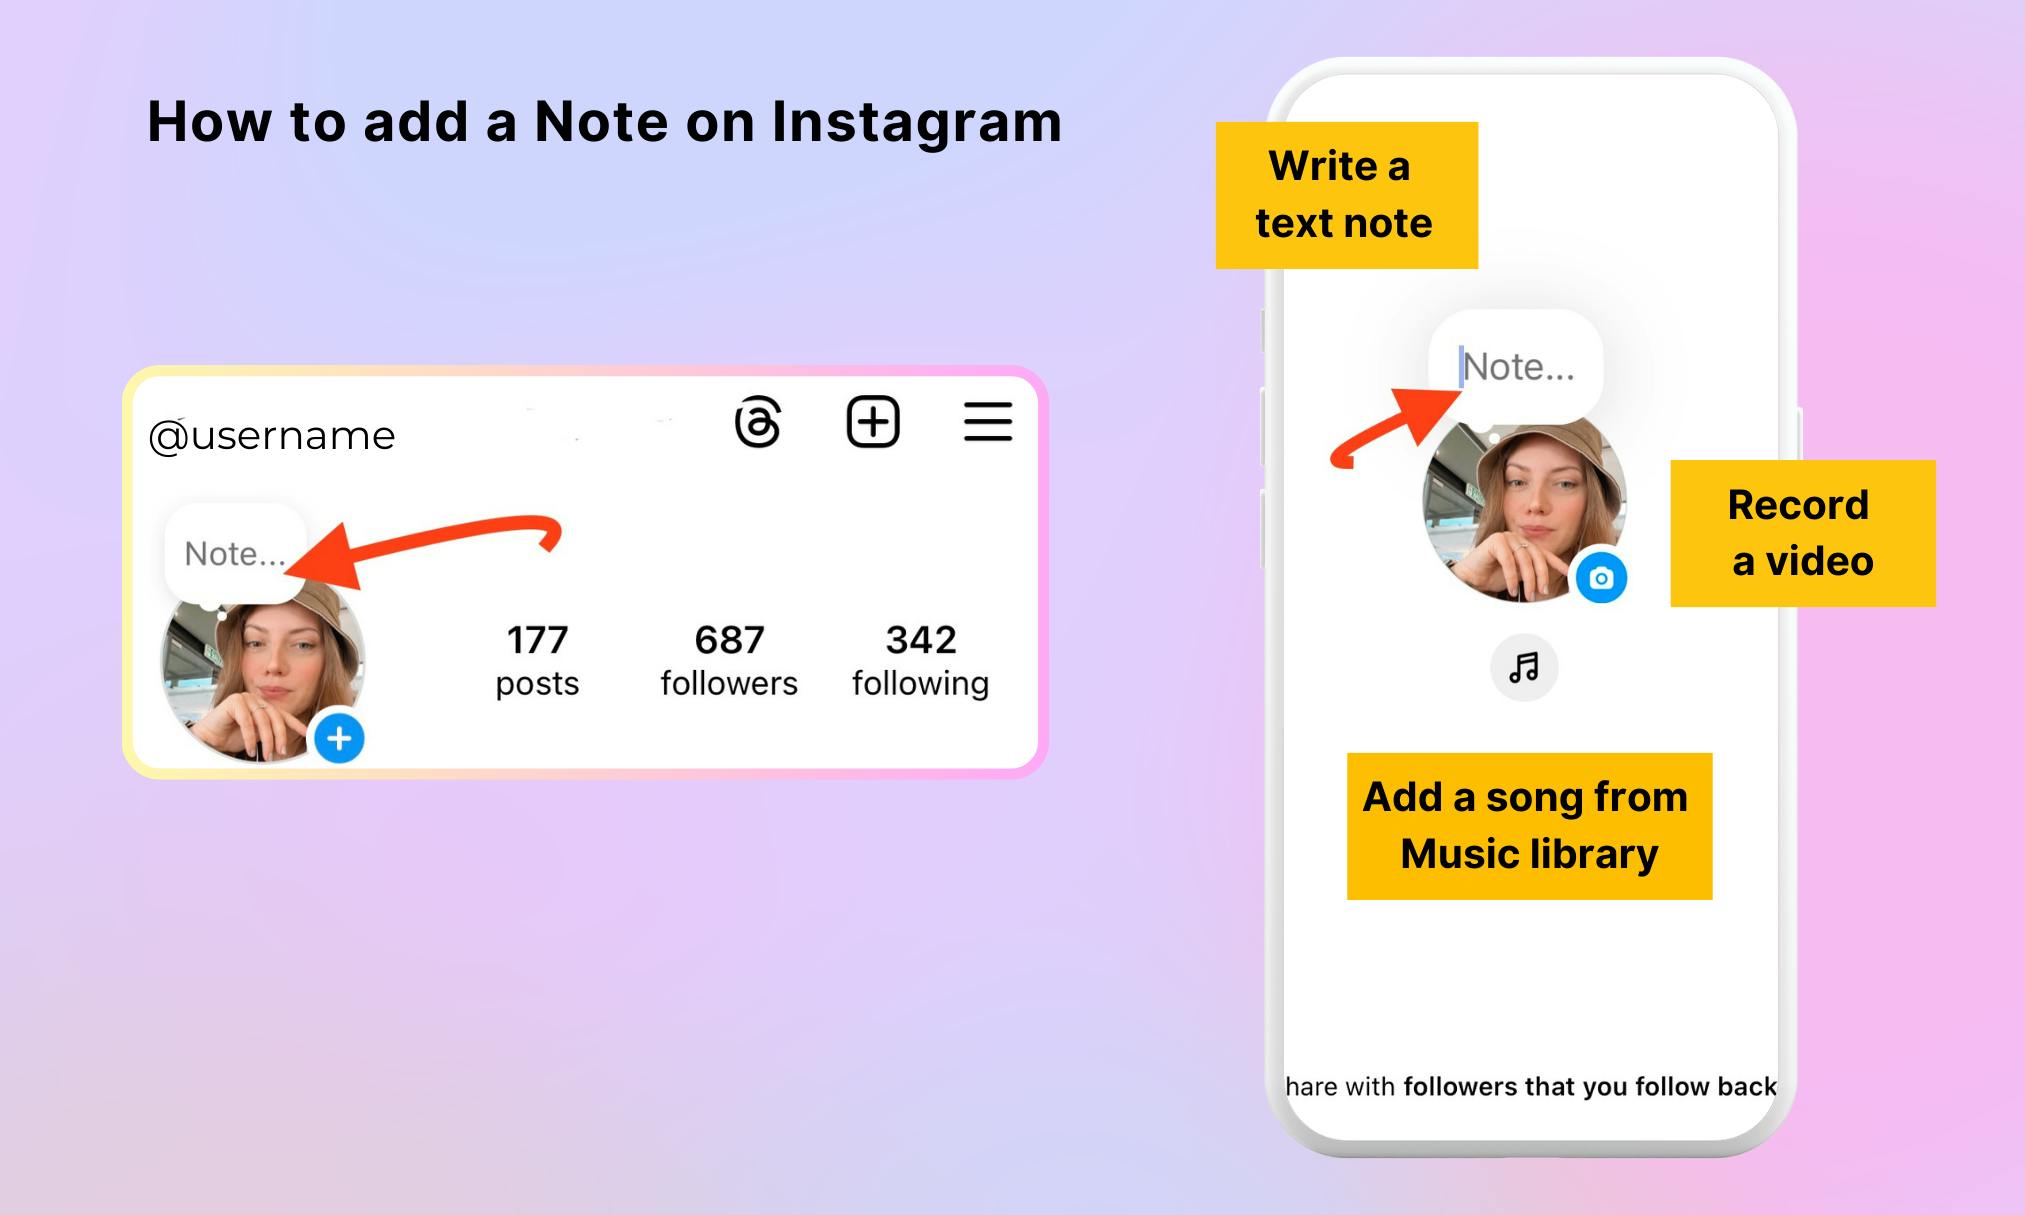 How to add a Note on Instagram